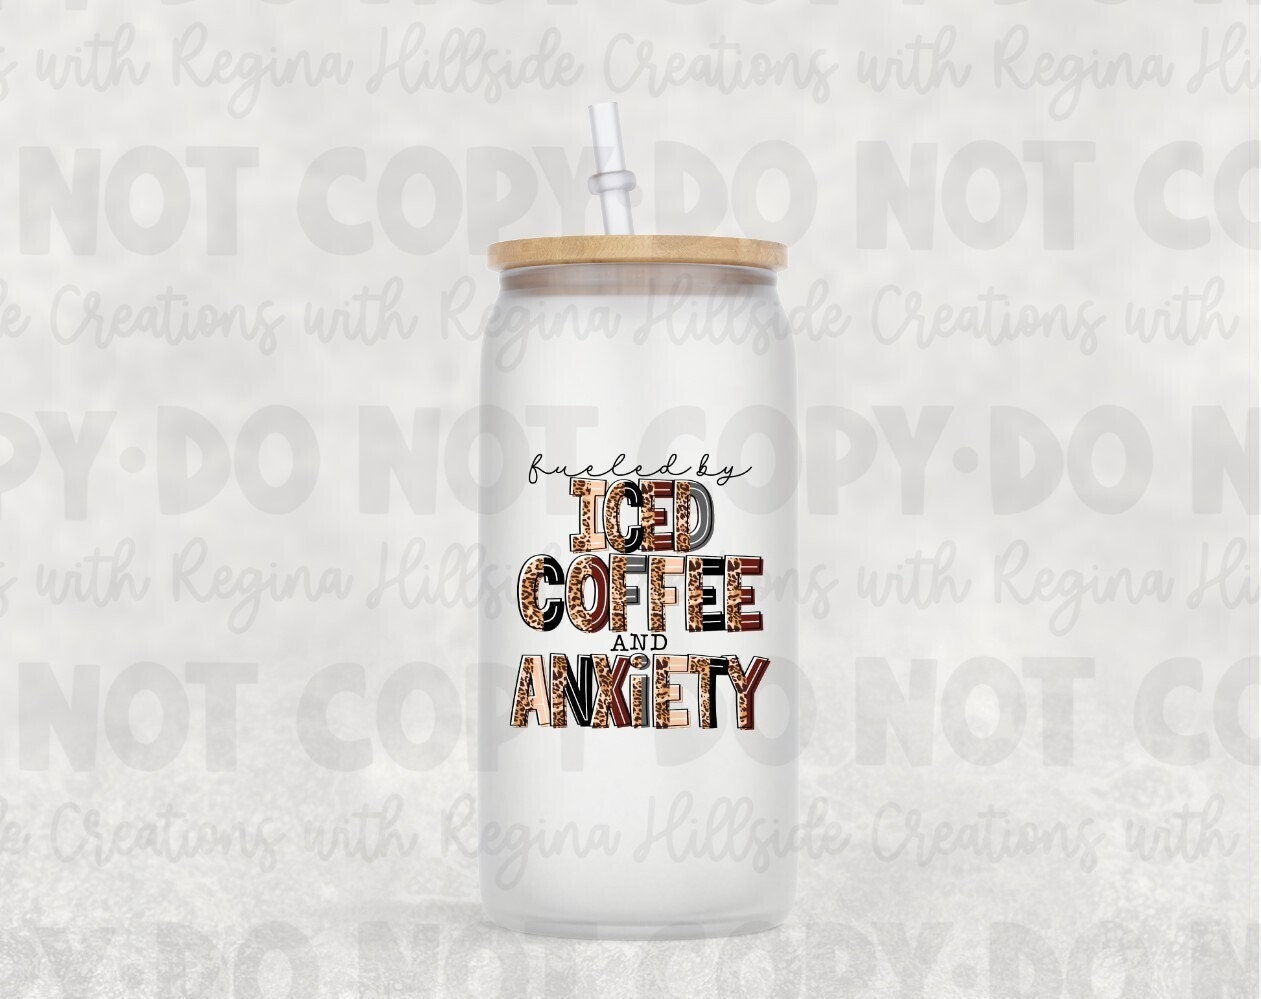 16oz Frosted Glass Iced Coffee Love Tumbler – Middleton Park Coffee